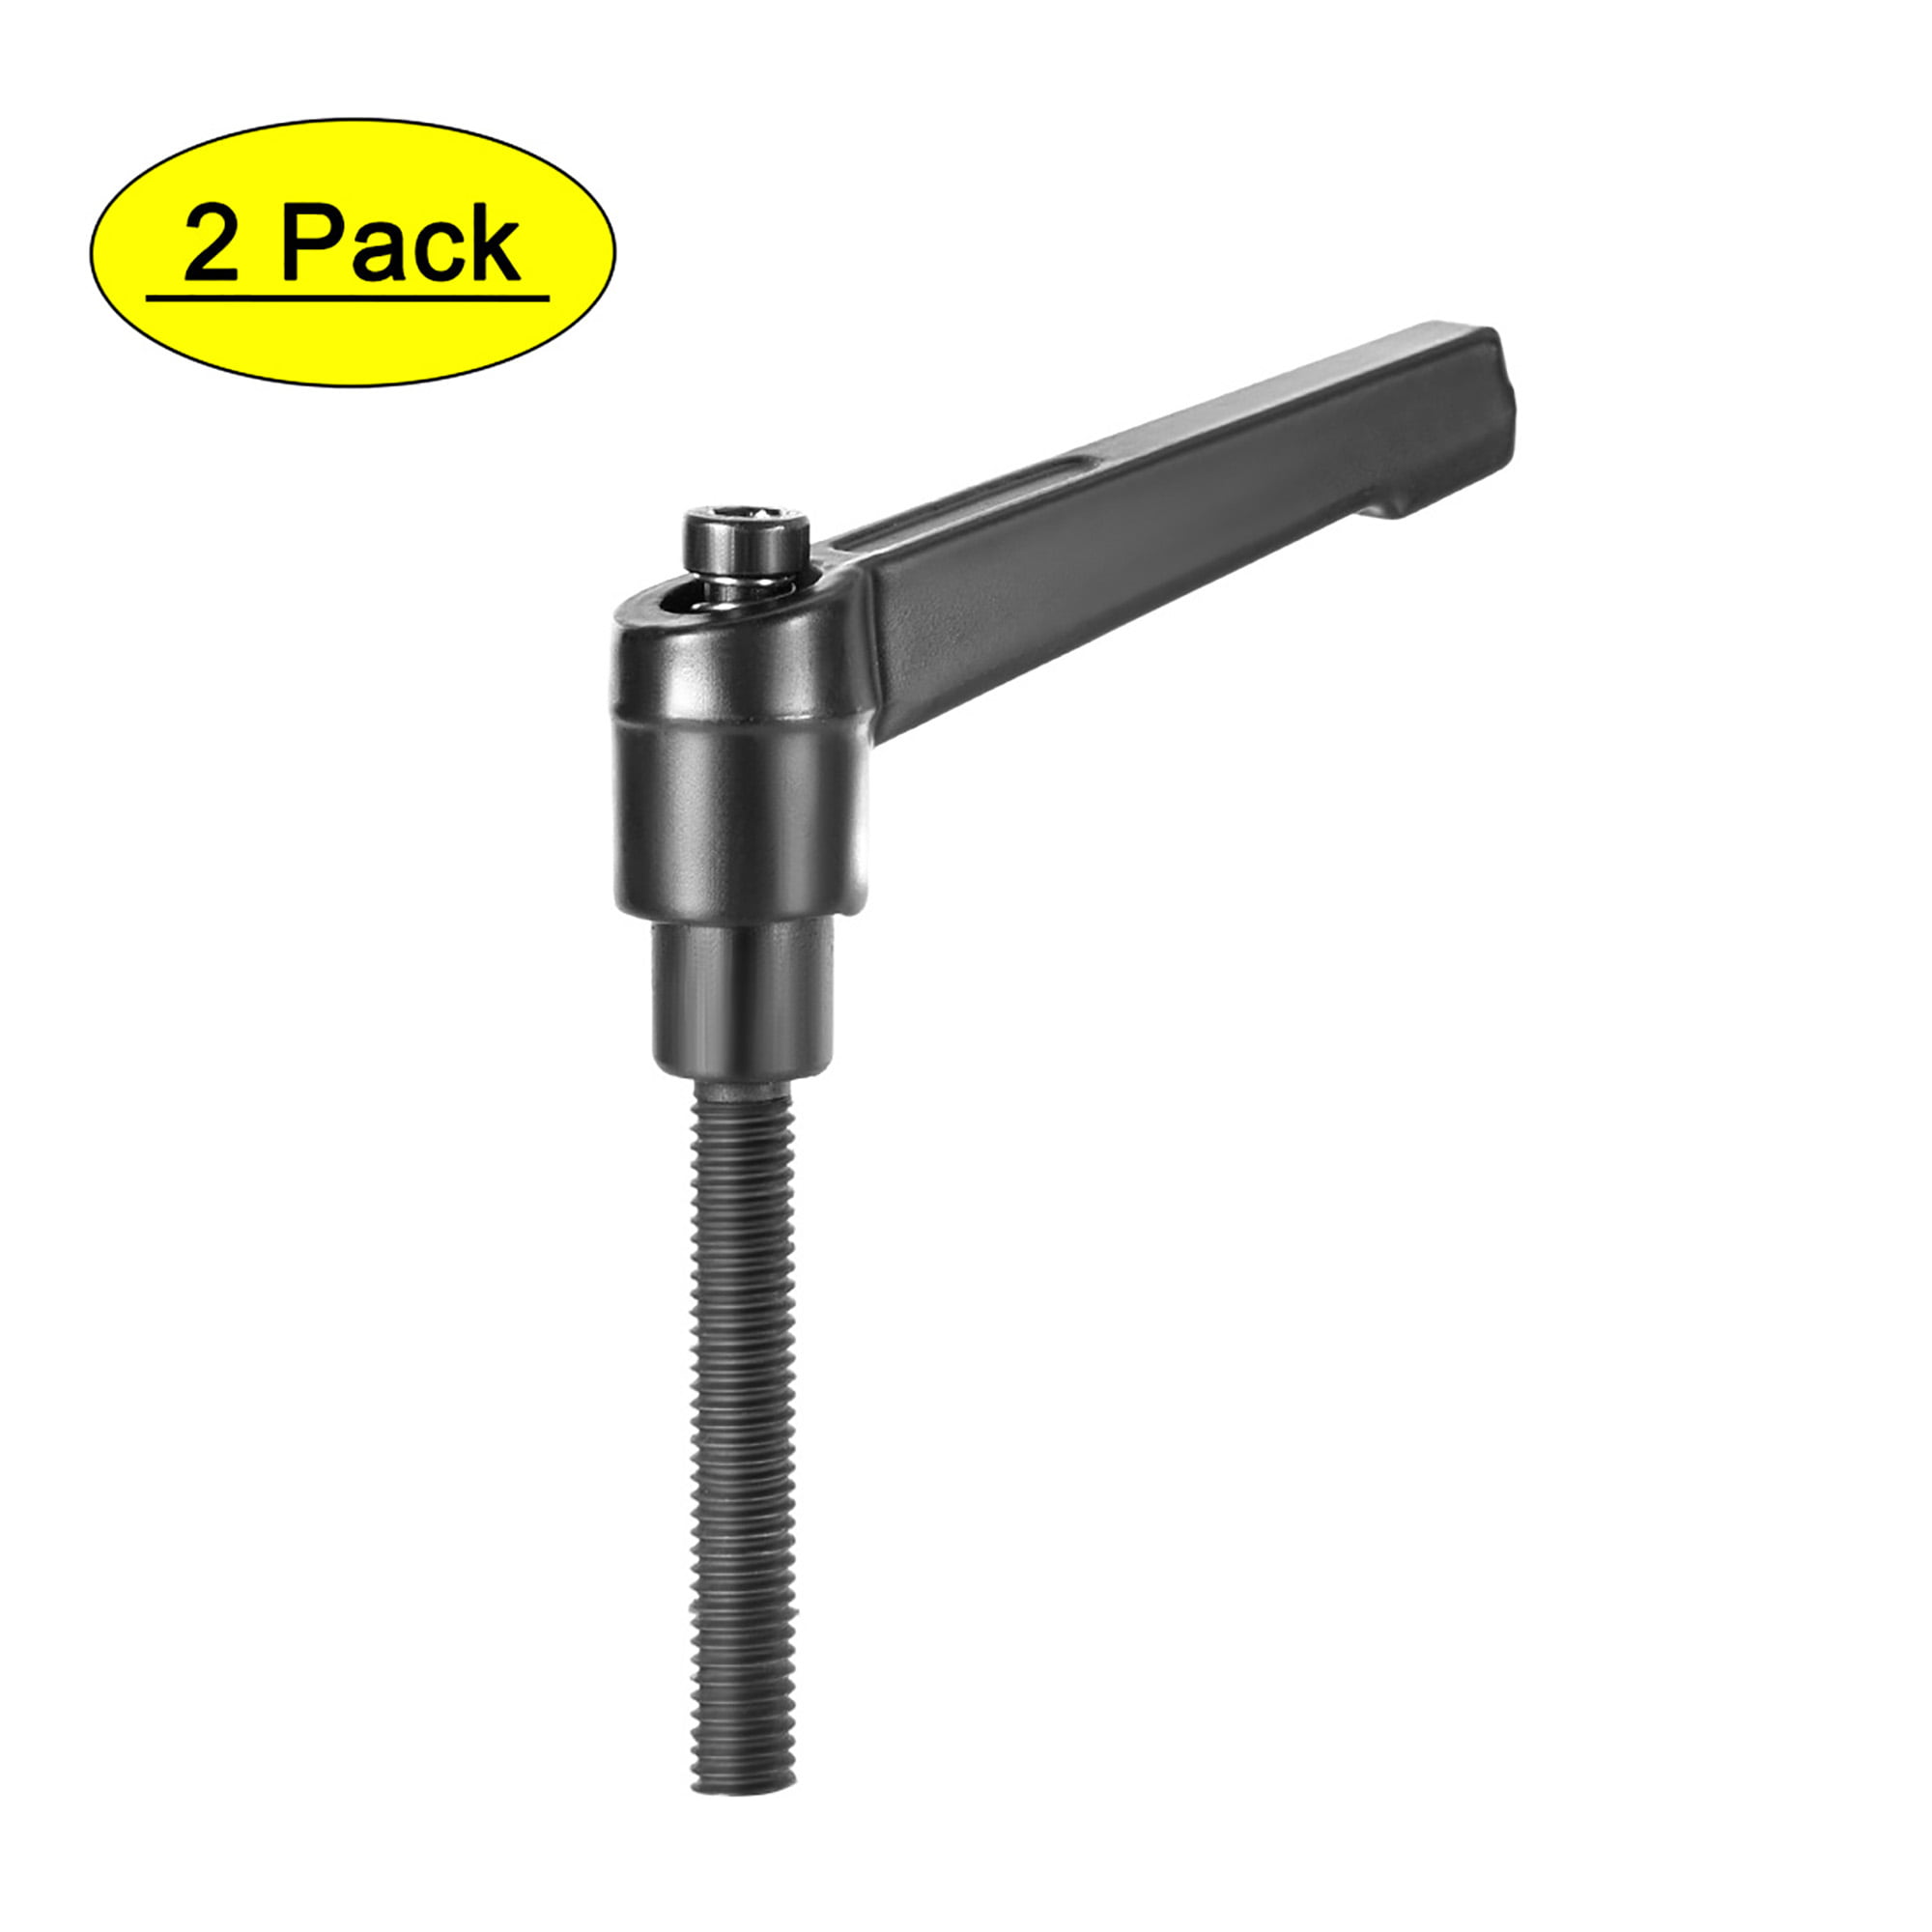 M6 x 40mm Handle Adjustable Clamping Lever Thread Male Threaded Stud 